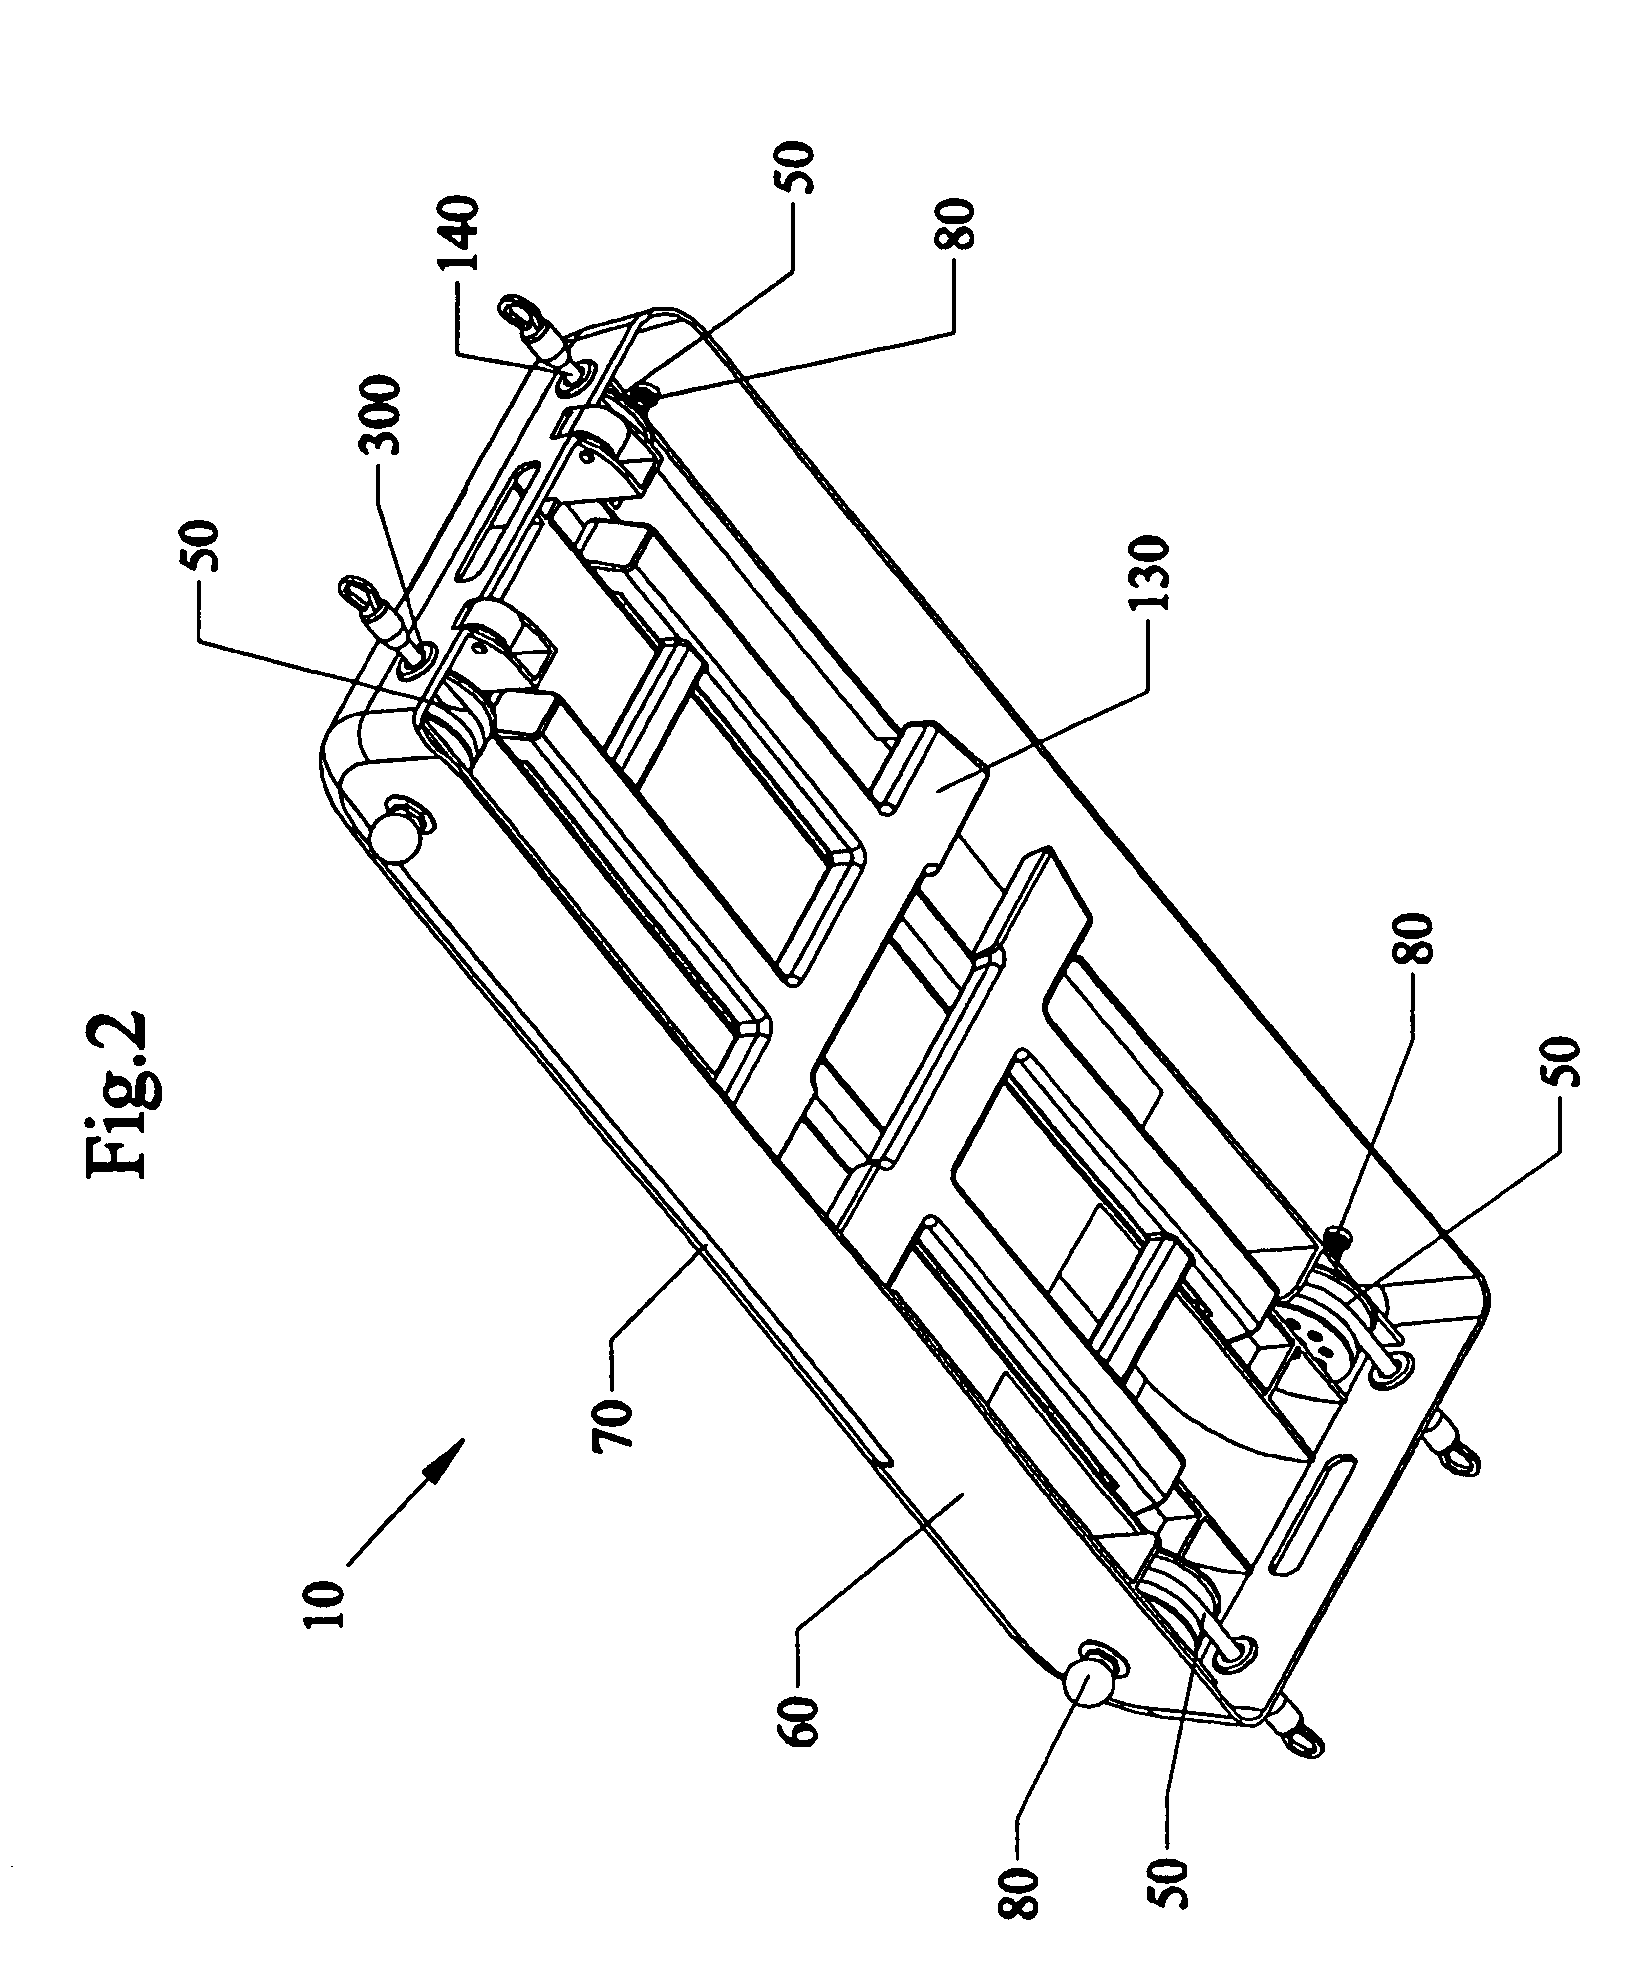 Portable convertible multifunction exercise apparatus and method